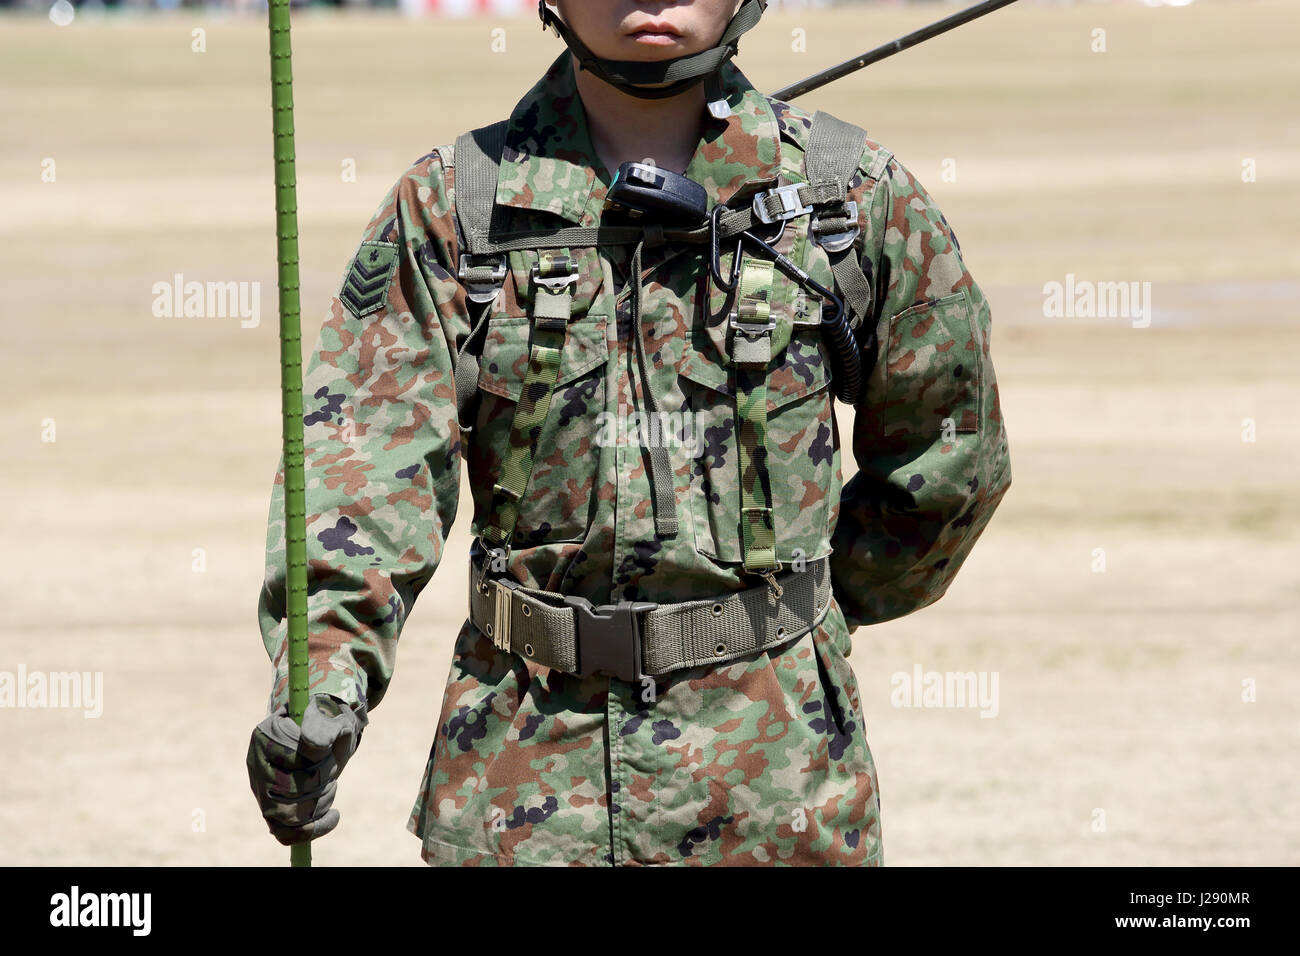 Japanese soldier with military camouflage uniform Stock Photo